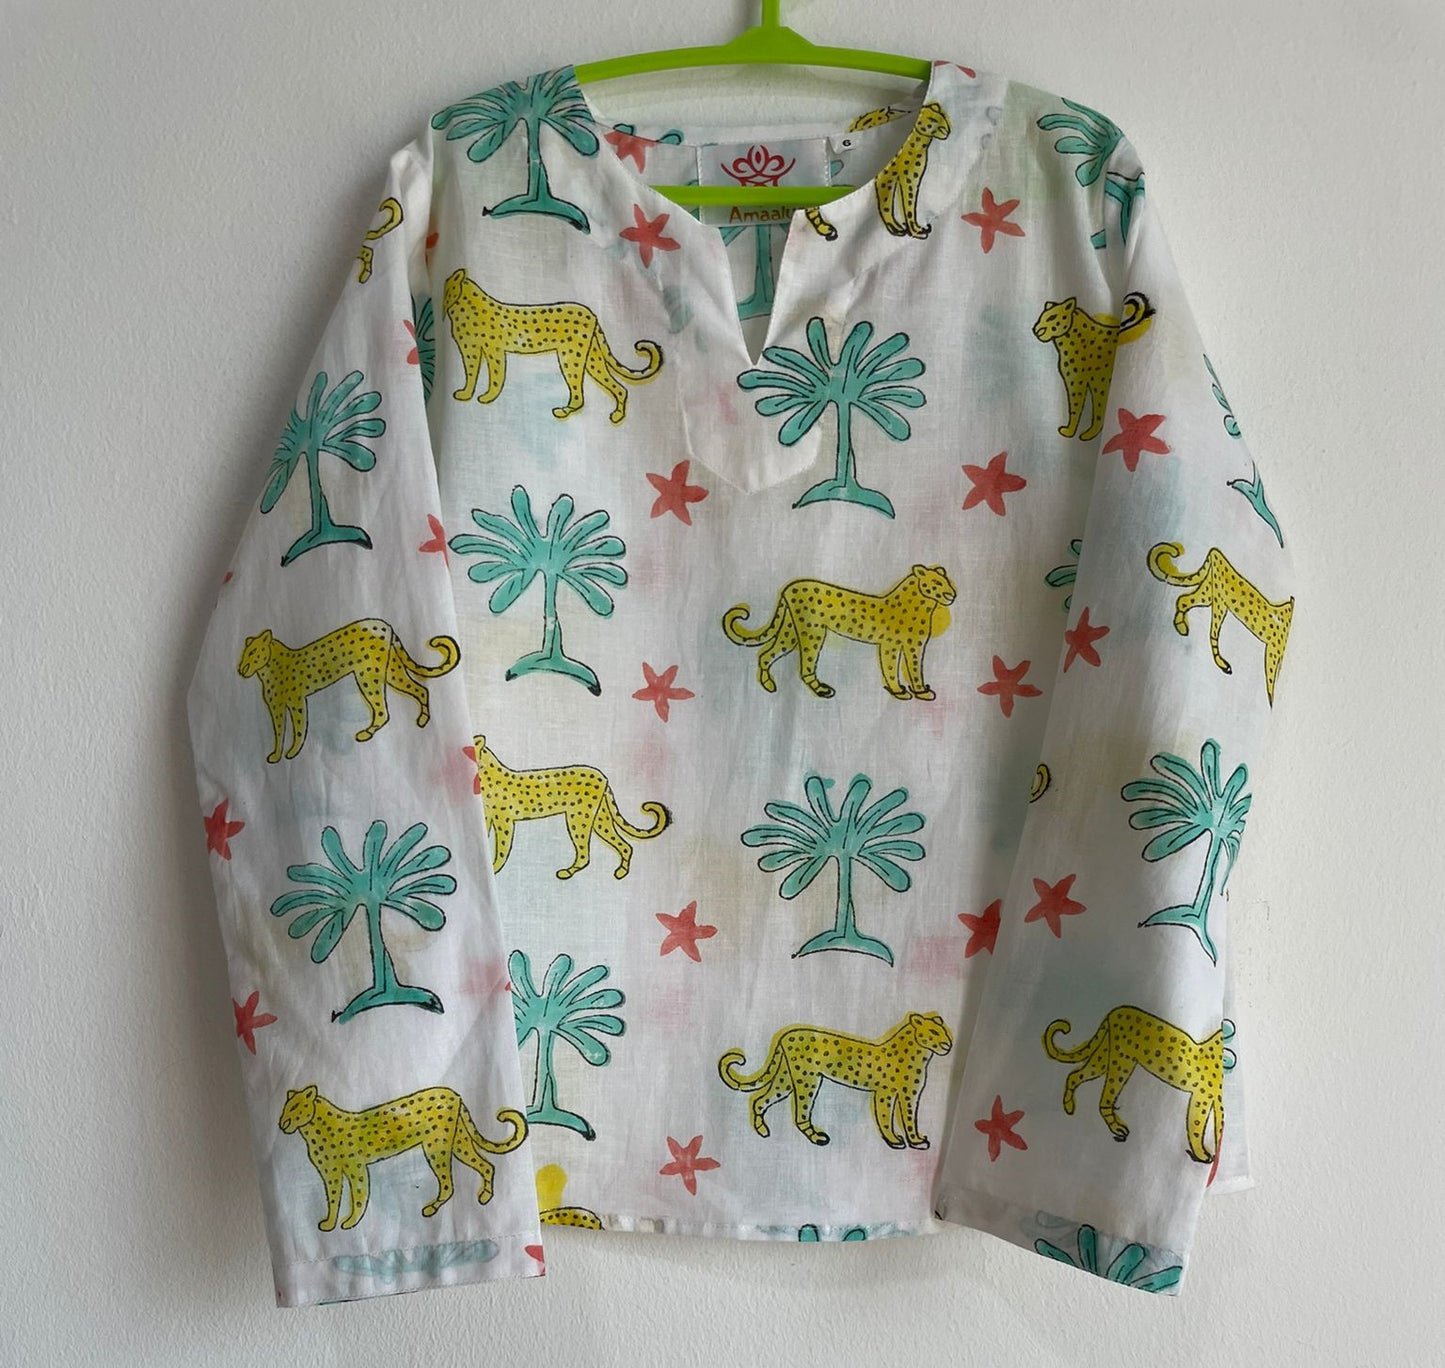 handmade and affordable night suit for kids, buy now in Singapore